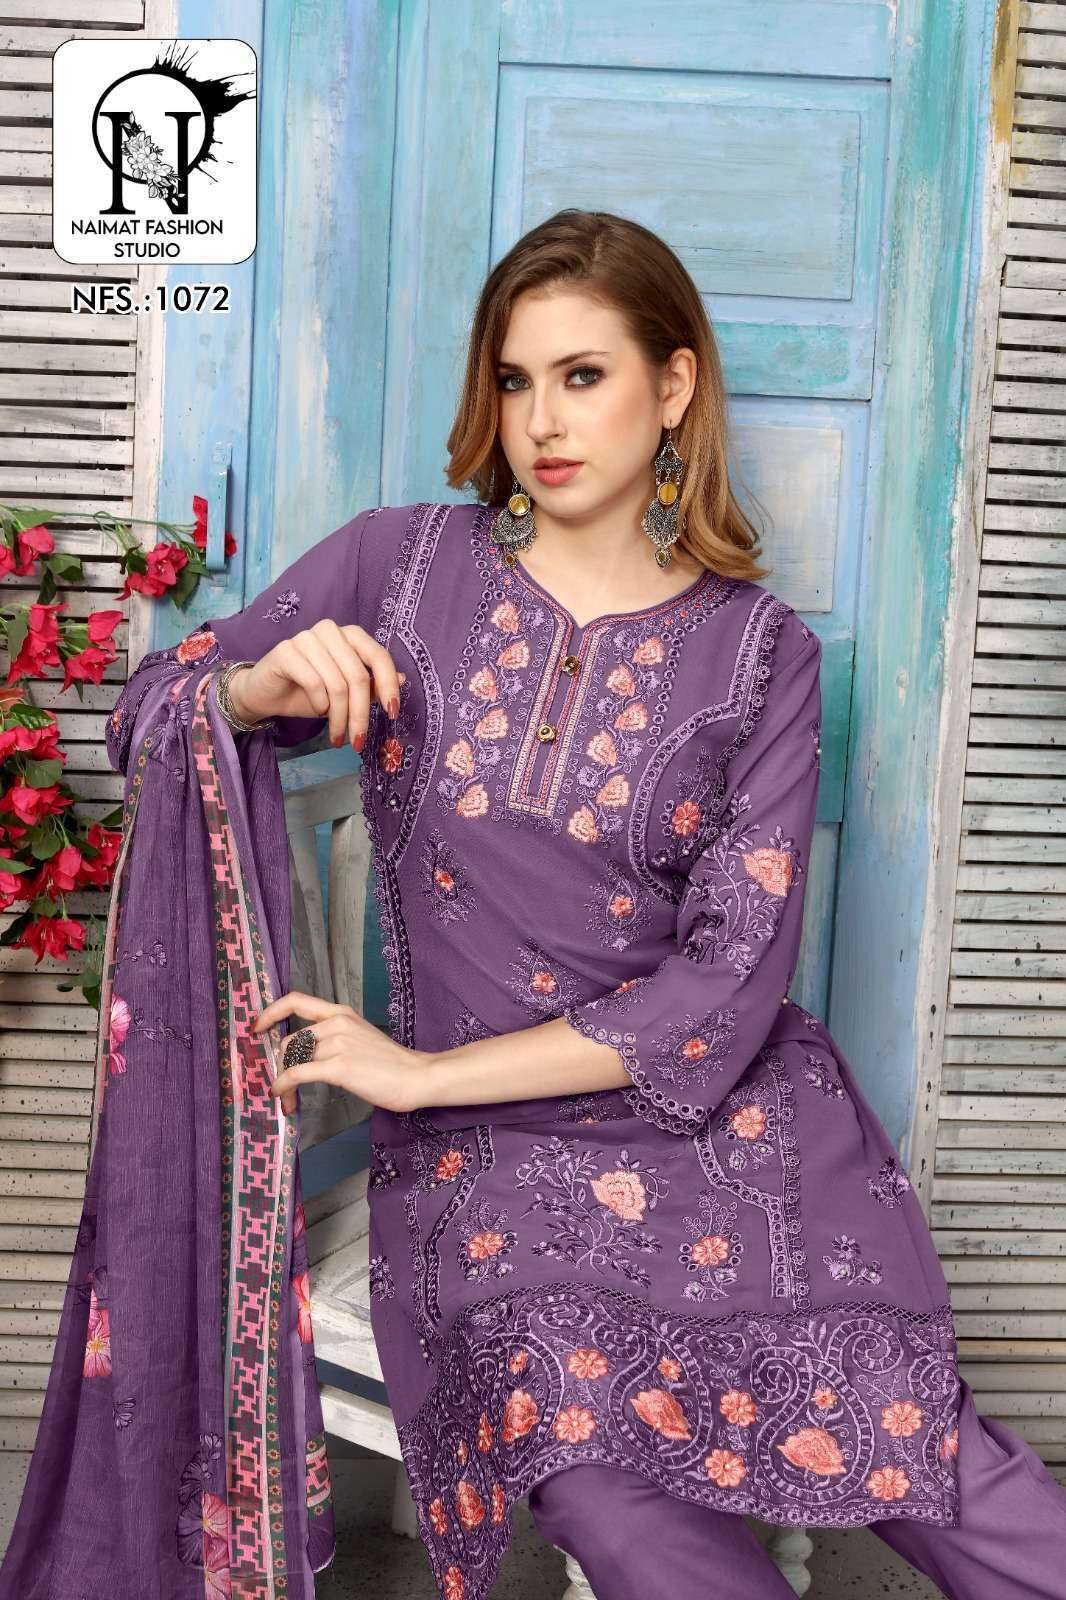 naimat 1072 pure faux georgette readymade suit 